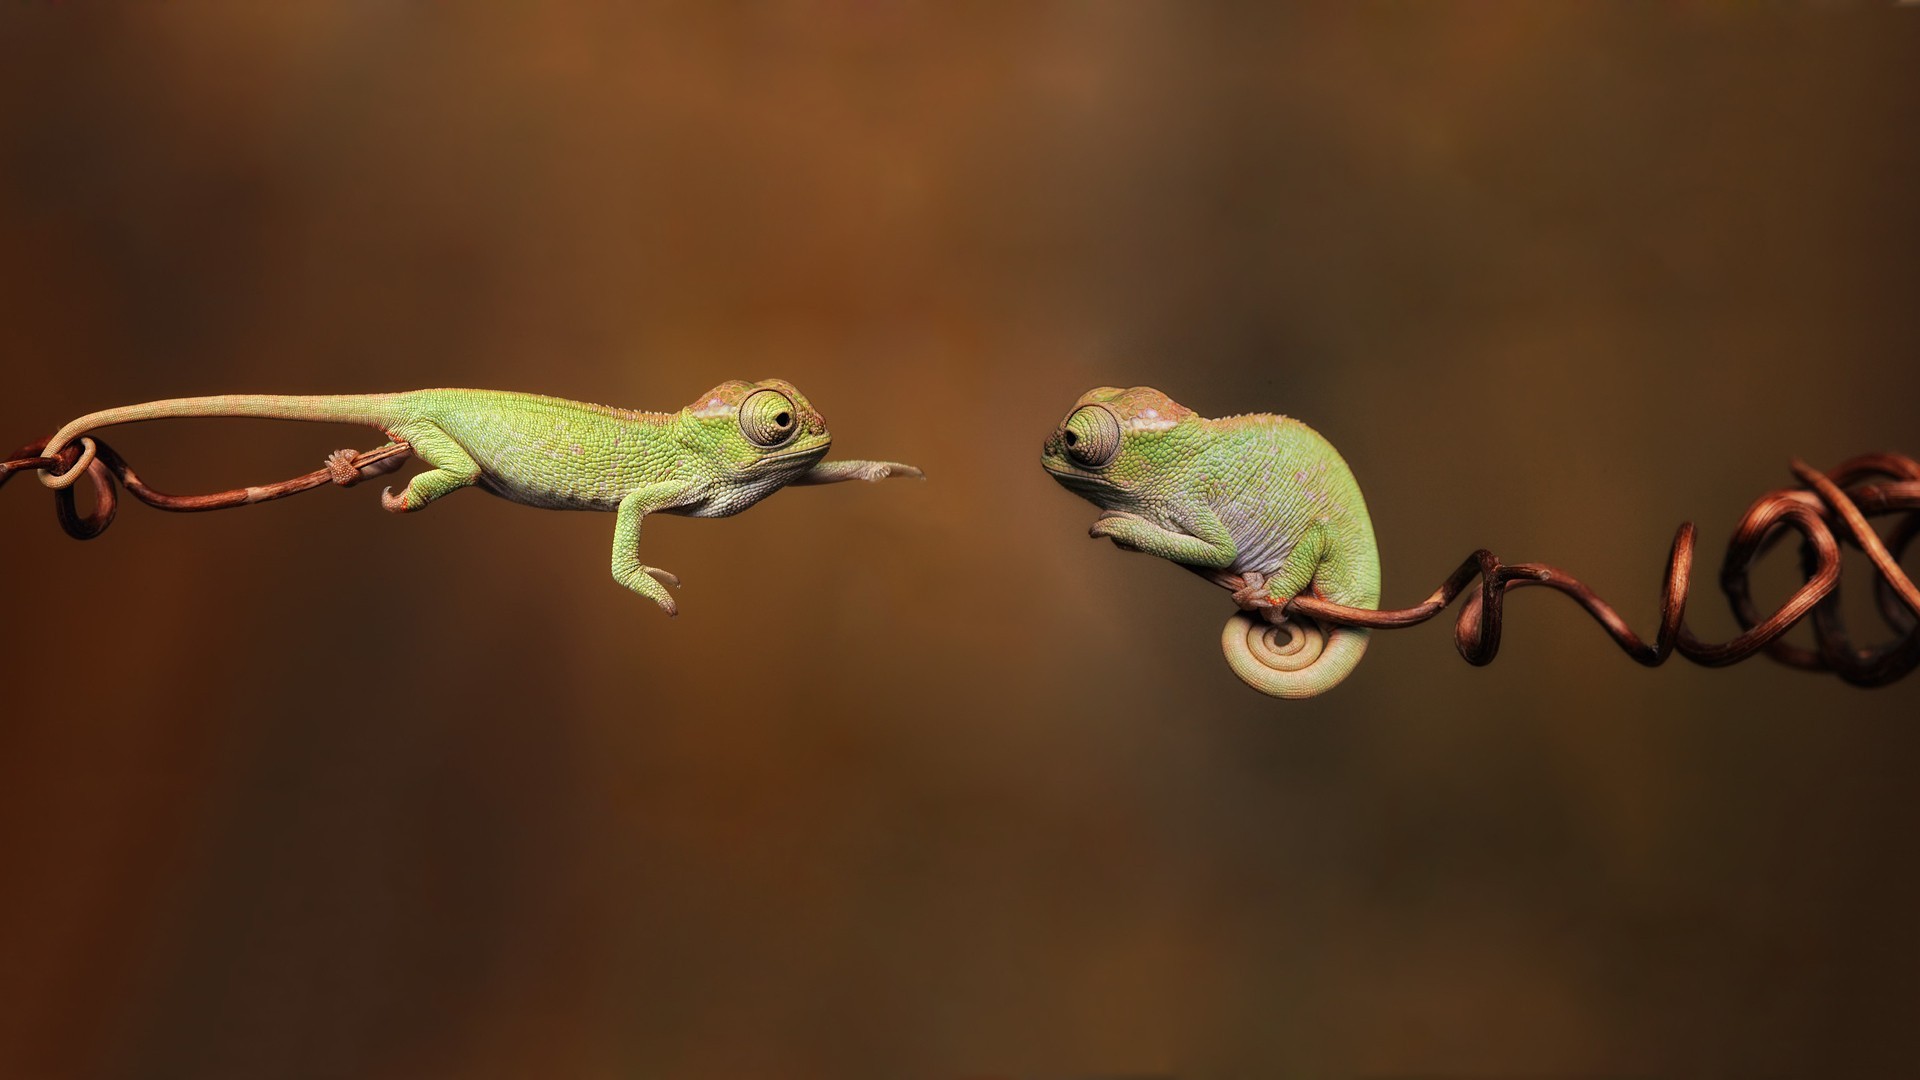 General 1920x1080 chameleons blurred twigs reptiles jumping animals wildlife digital art branch simple background nature